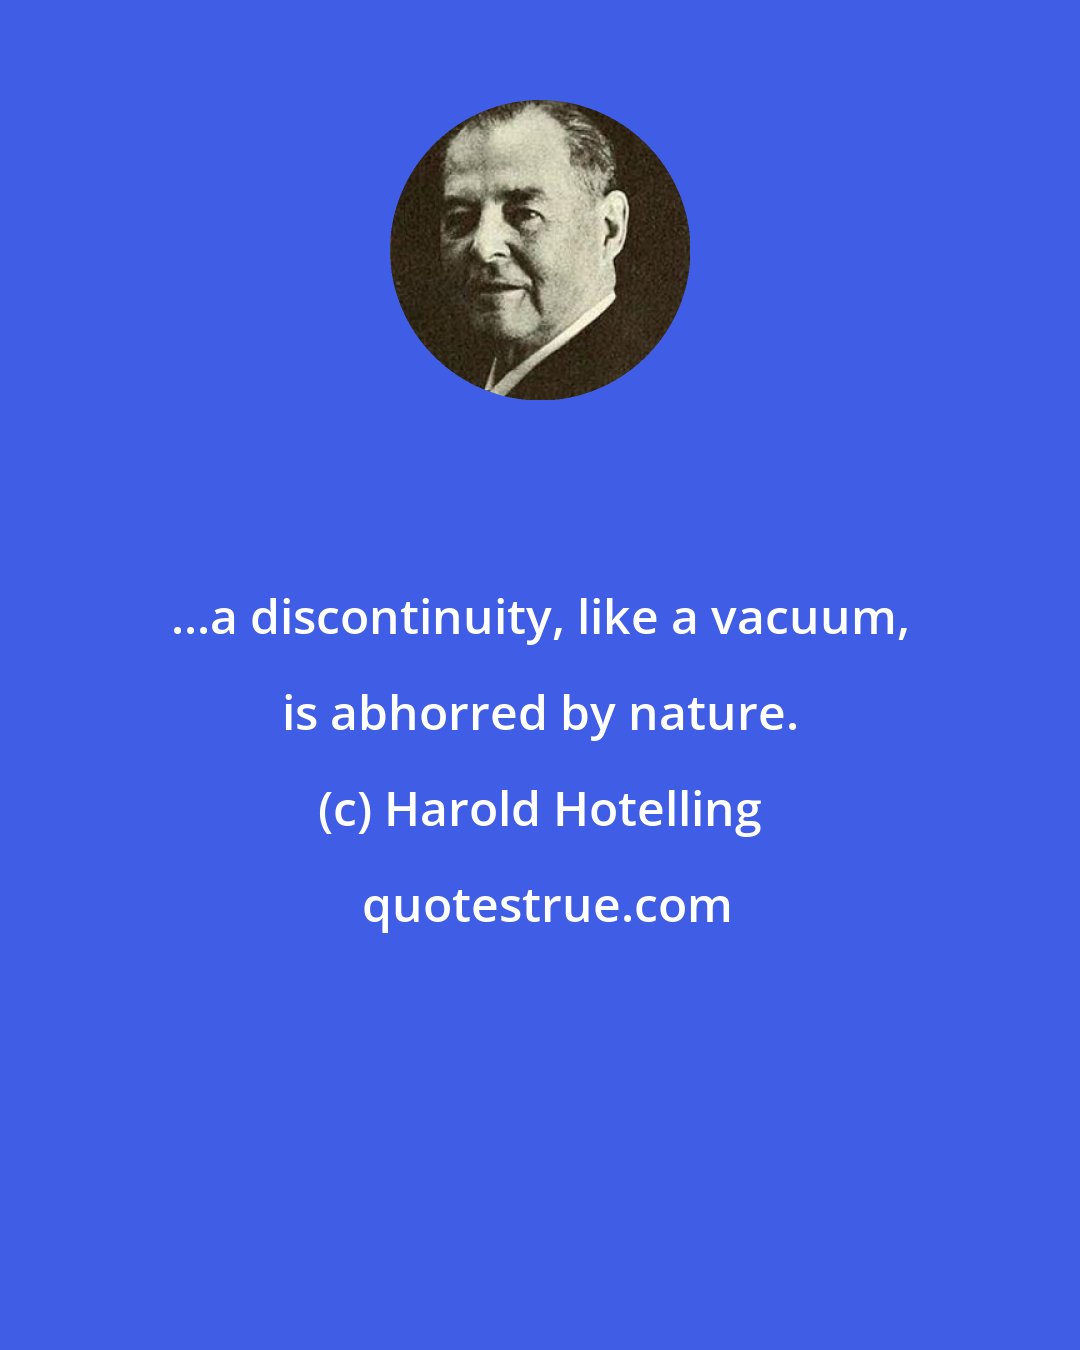 Harold Hotelling: ...a discontinuity, like a vacuum, is abhorred by nature.